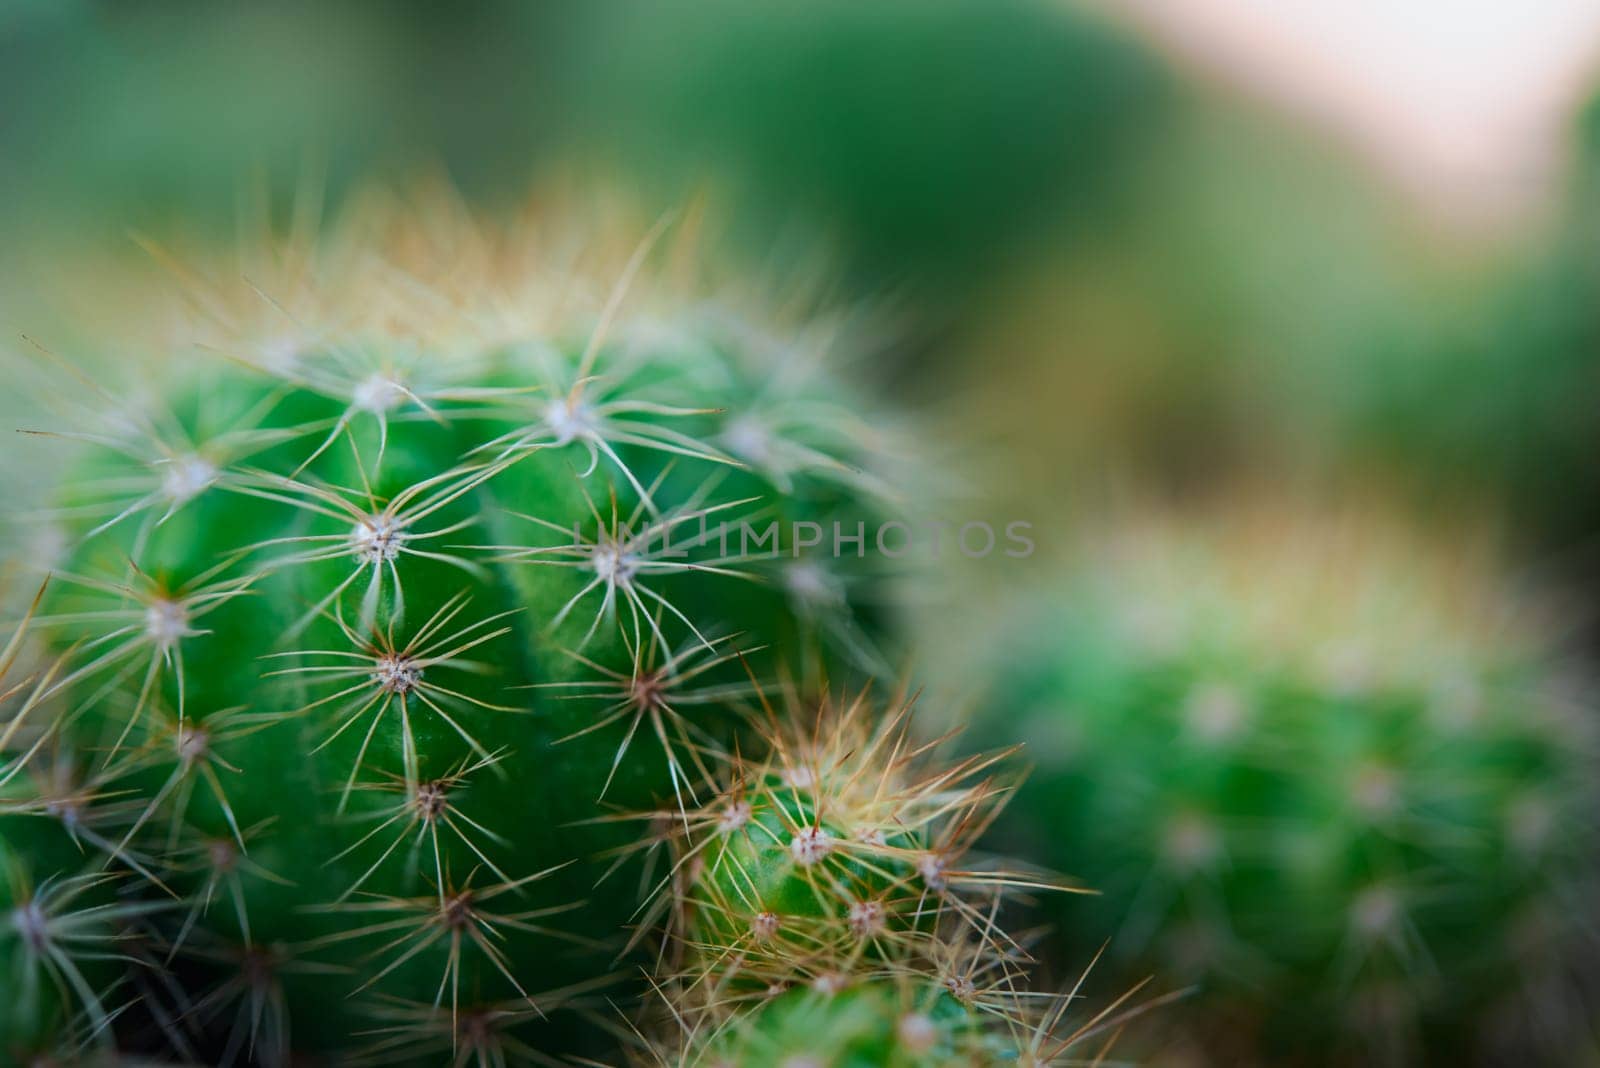 Cactus and Cactus flowers popular for decorative by PongMoji